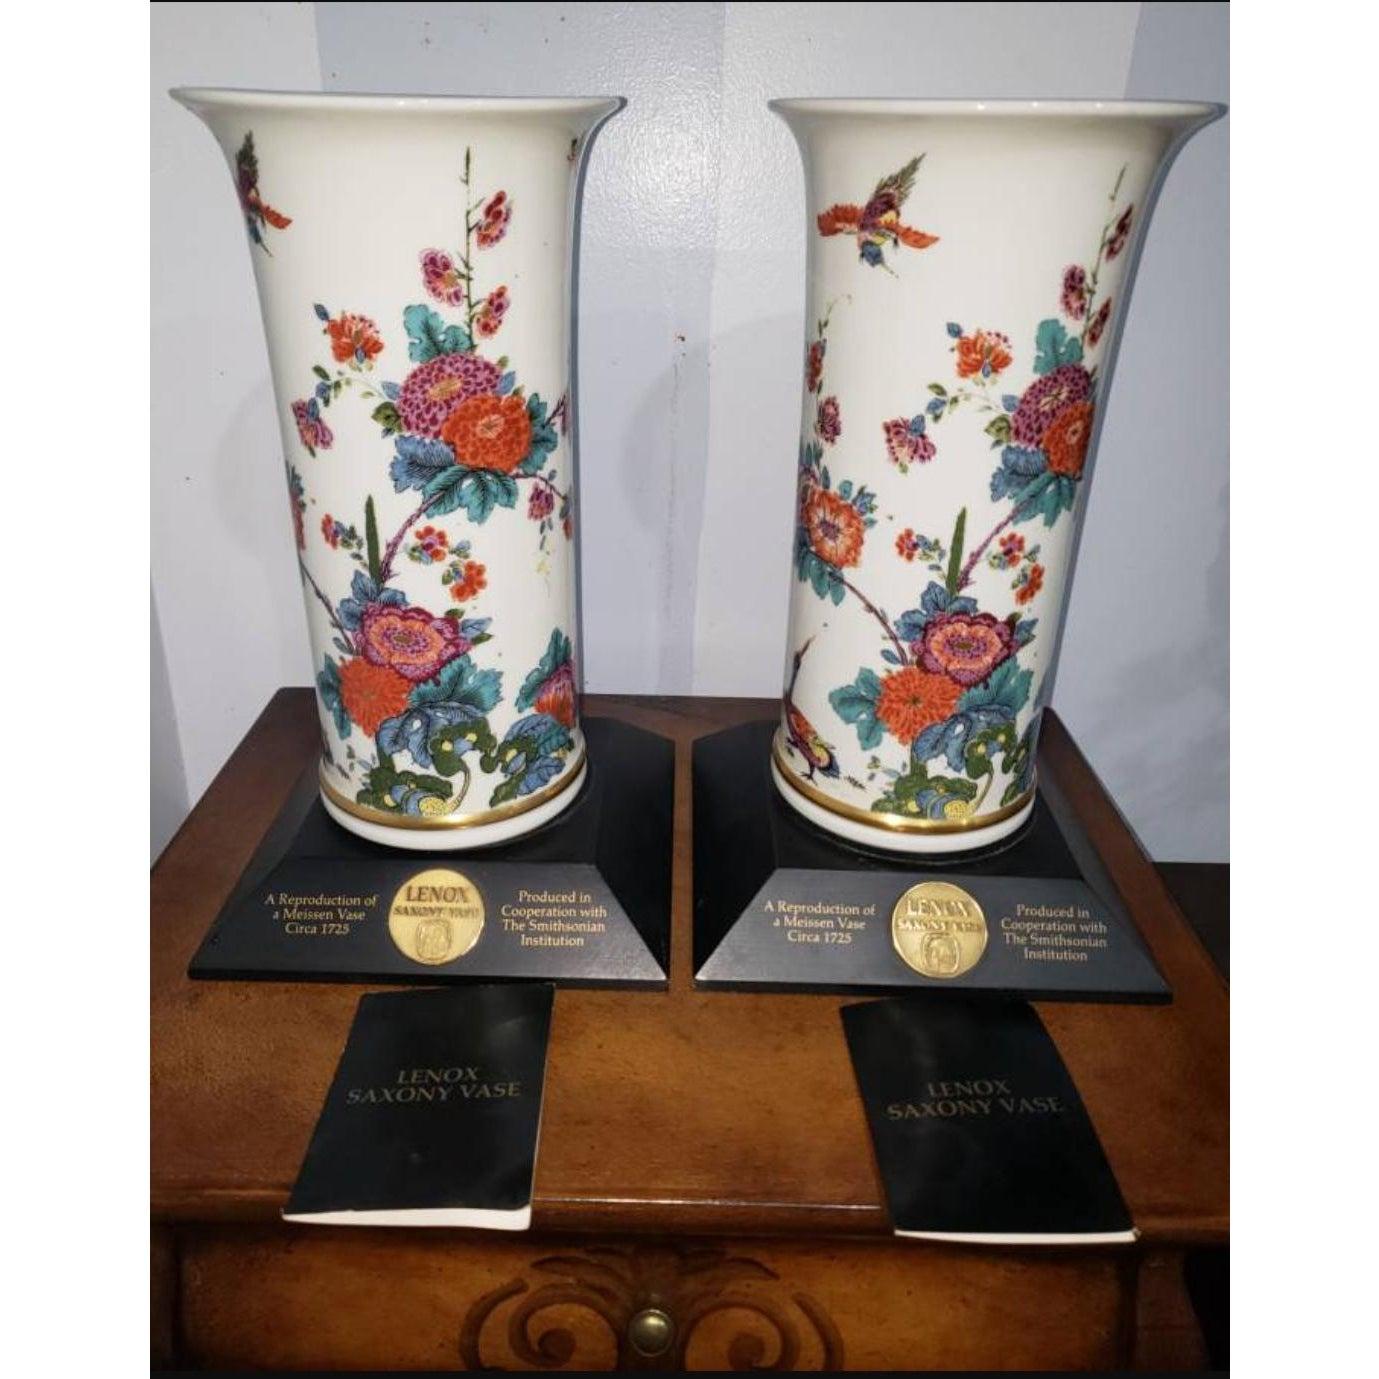 A pair of large Lennox Saxony Vases 1979, first official Reproduction of a Meissen Vase Circa 1725 produced by the Smithsonian Institution. These vases are flanked with a 22 carats gold band and come with a 7.5